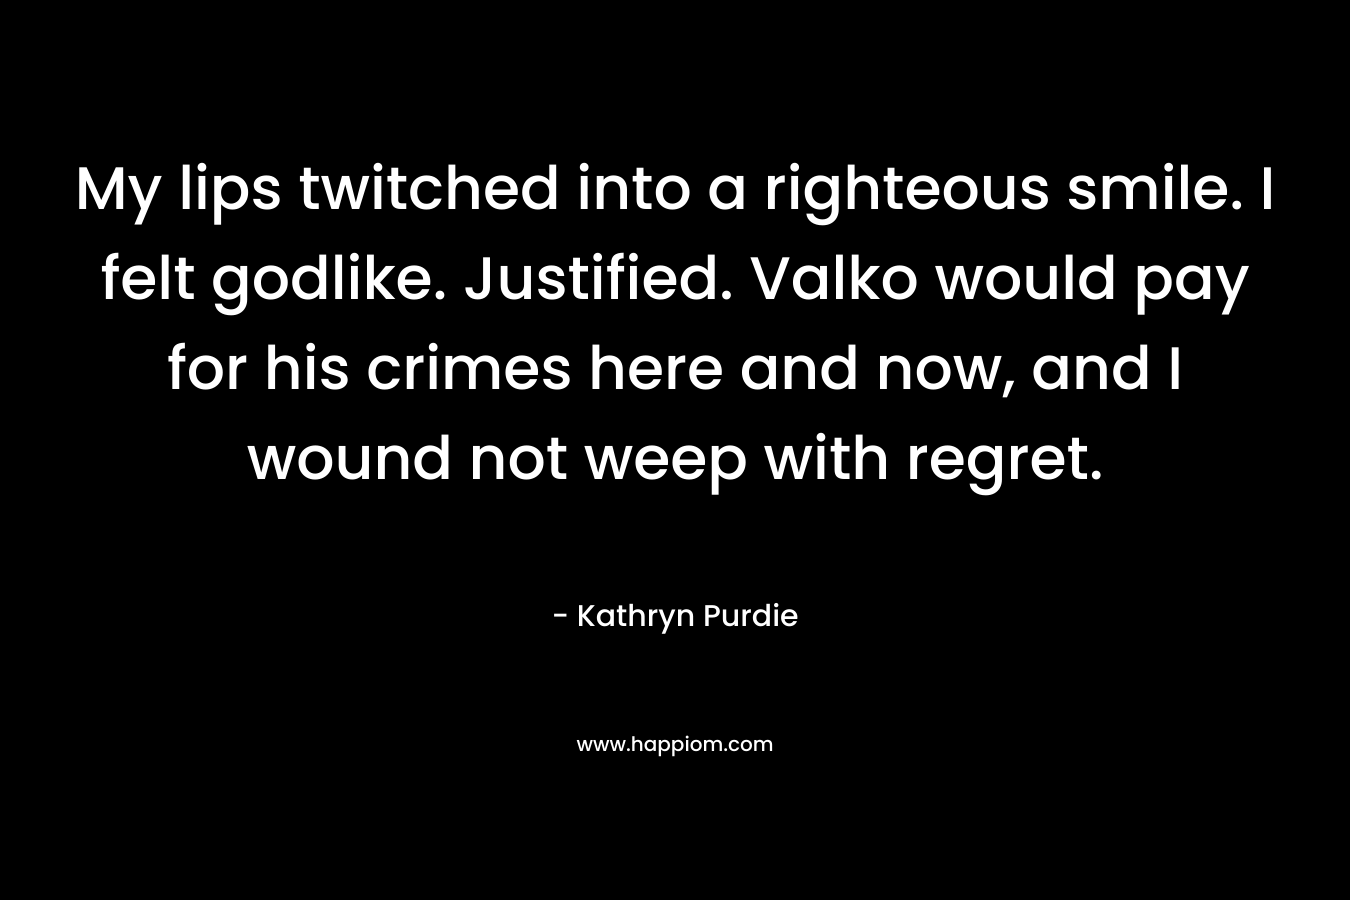 My lips twitched into a righteous smile. I felt godlike. Justified. Valko would pay for his crimes here and now, and I wound not weep with regret. – Kathryn Purdie